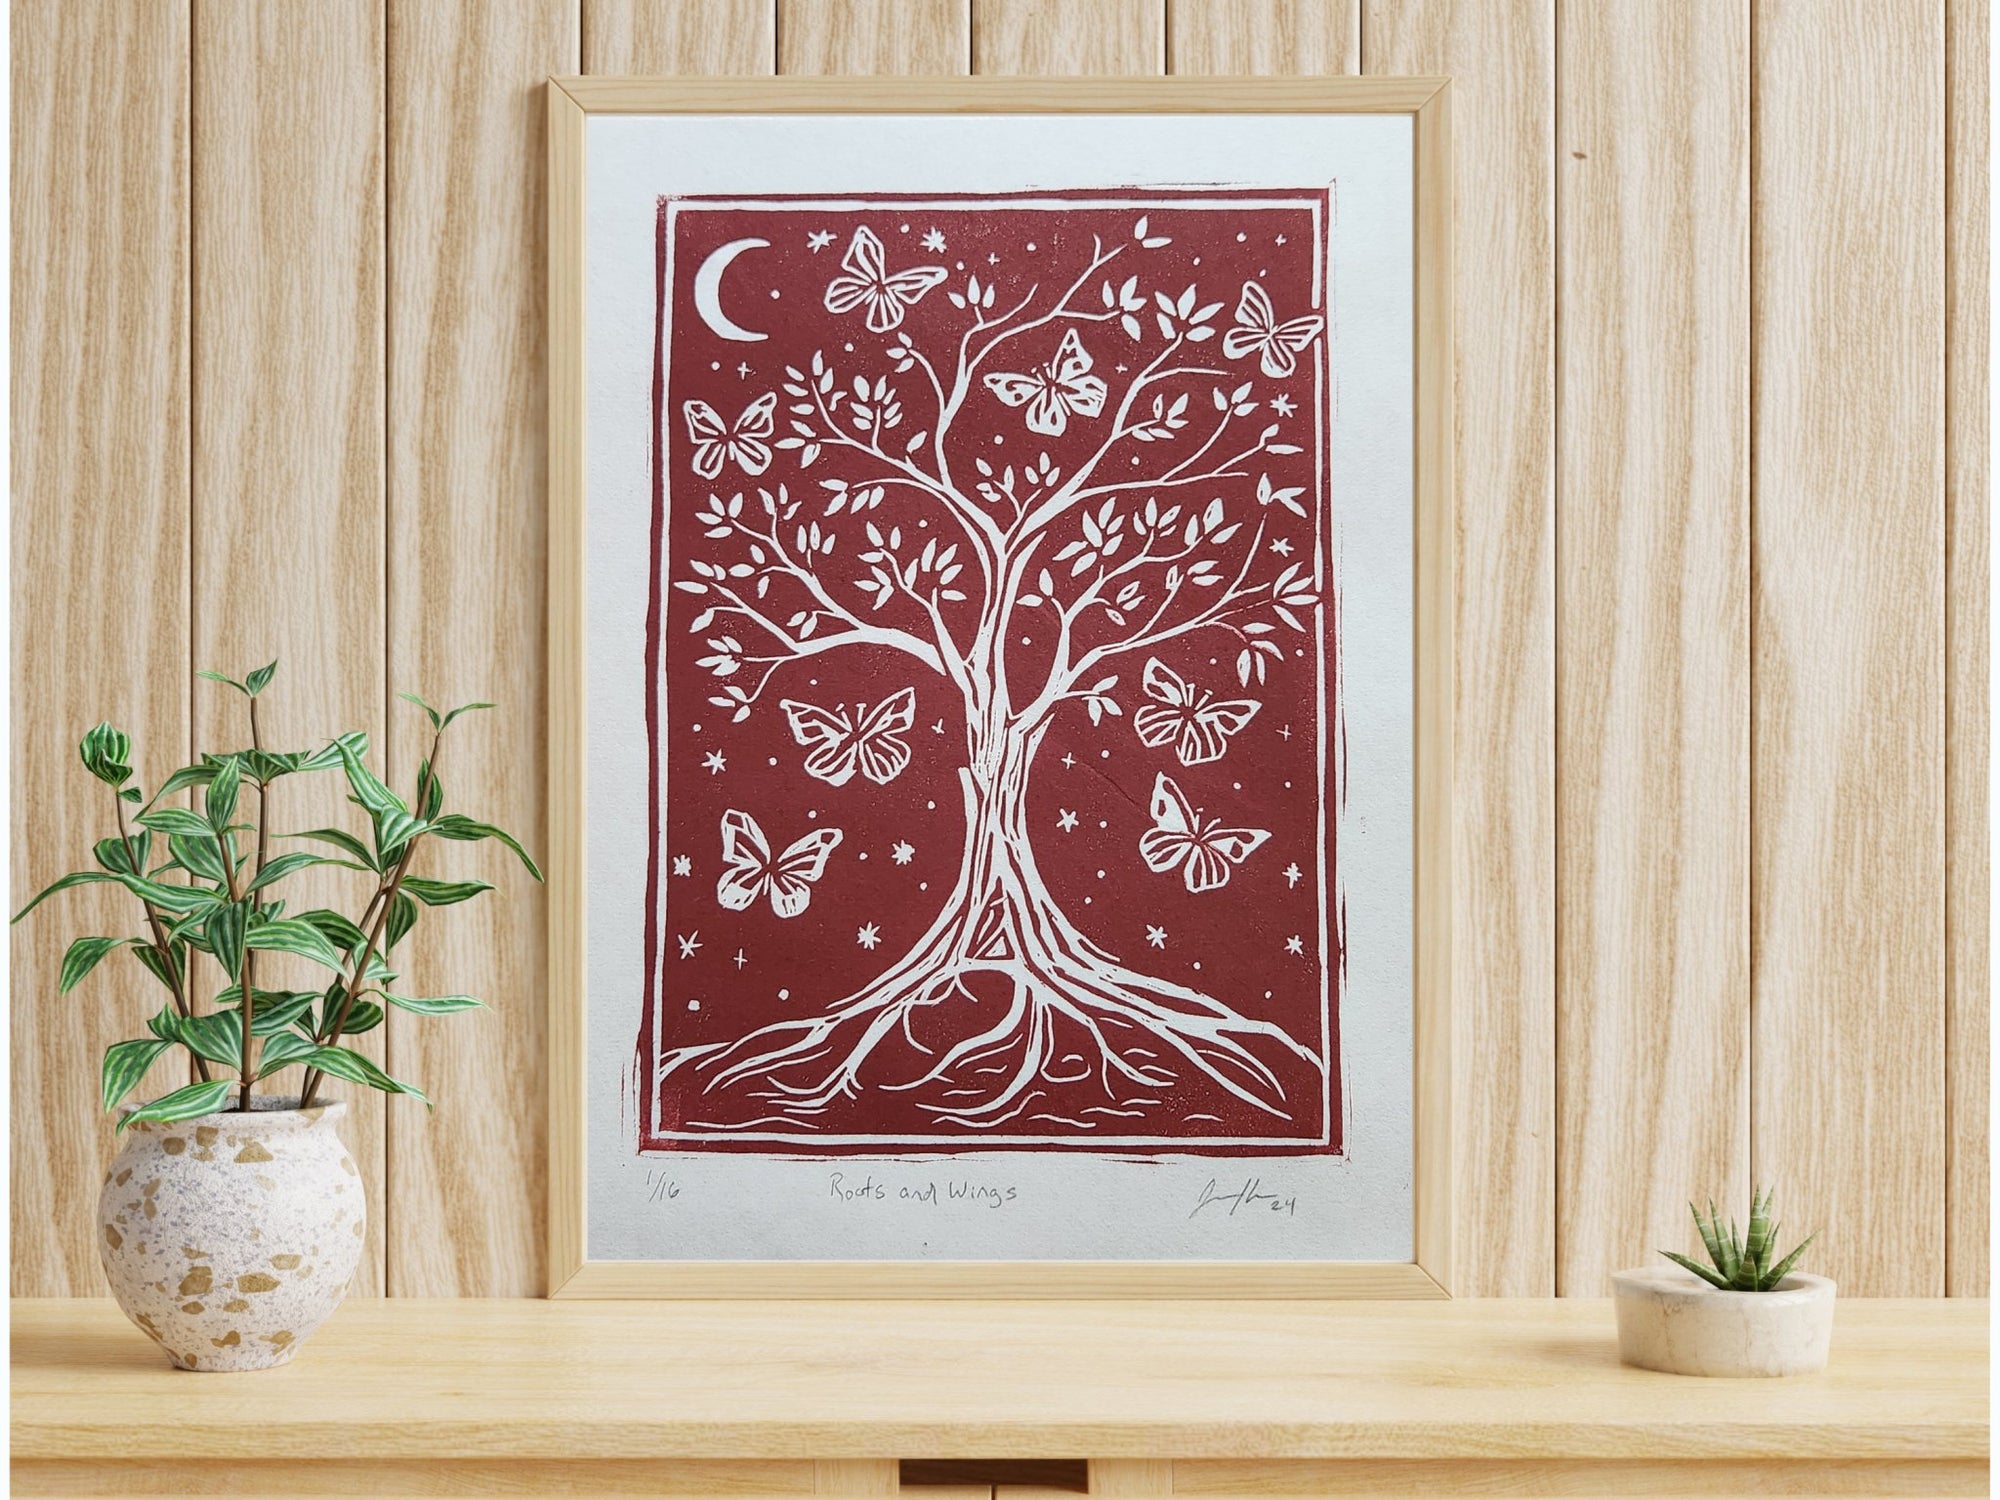 Roots and Wings Linocut Print - Indigenized